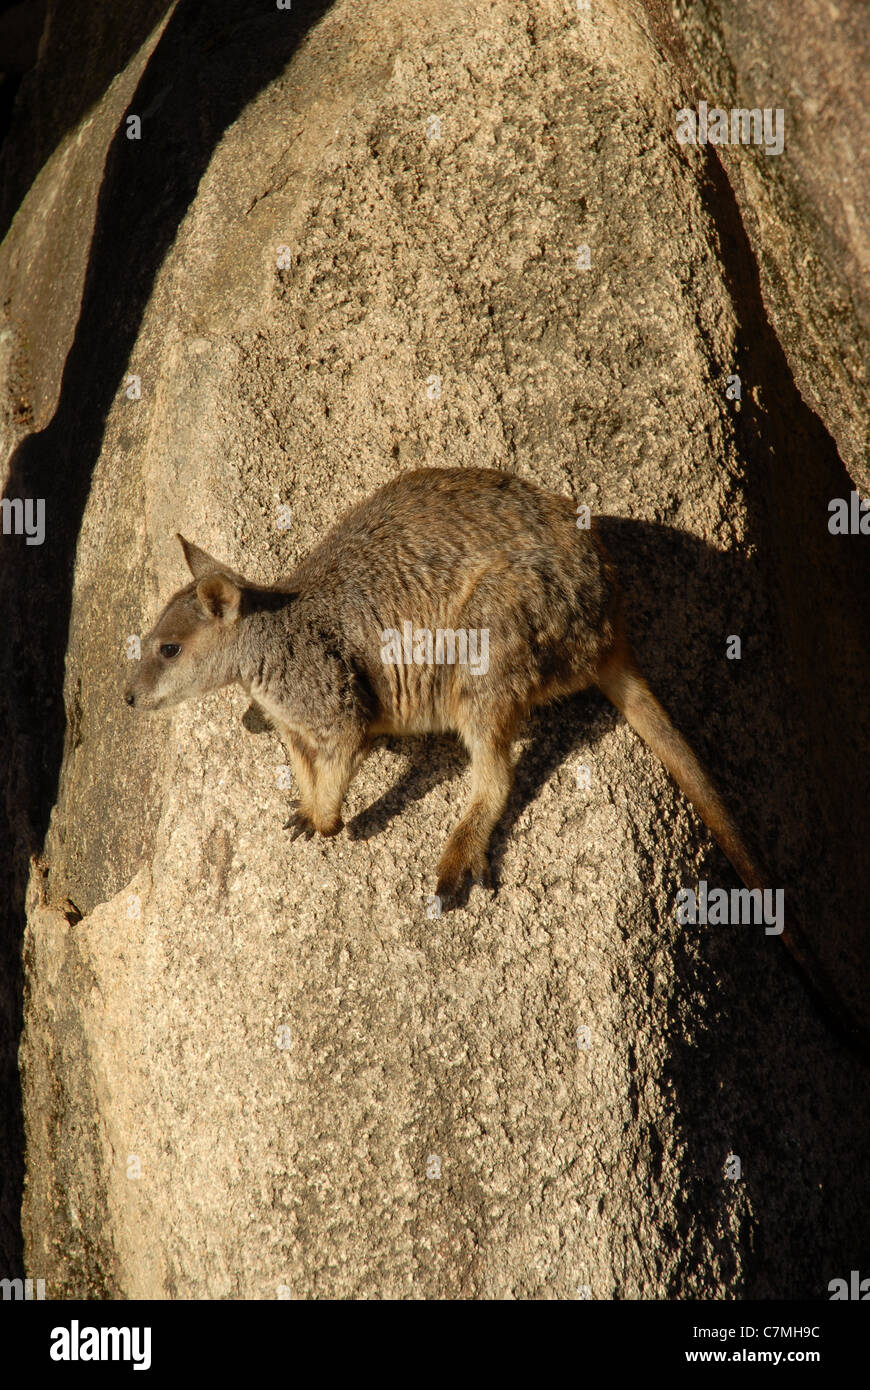 allied Rock wallaby (Petrogale assimilis), Geoffrey Bay, Magnetic Island, Townsville, Queensland, Australia Stock Photo